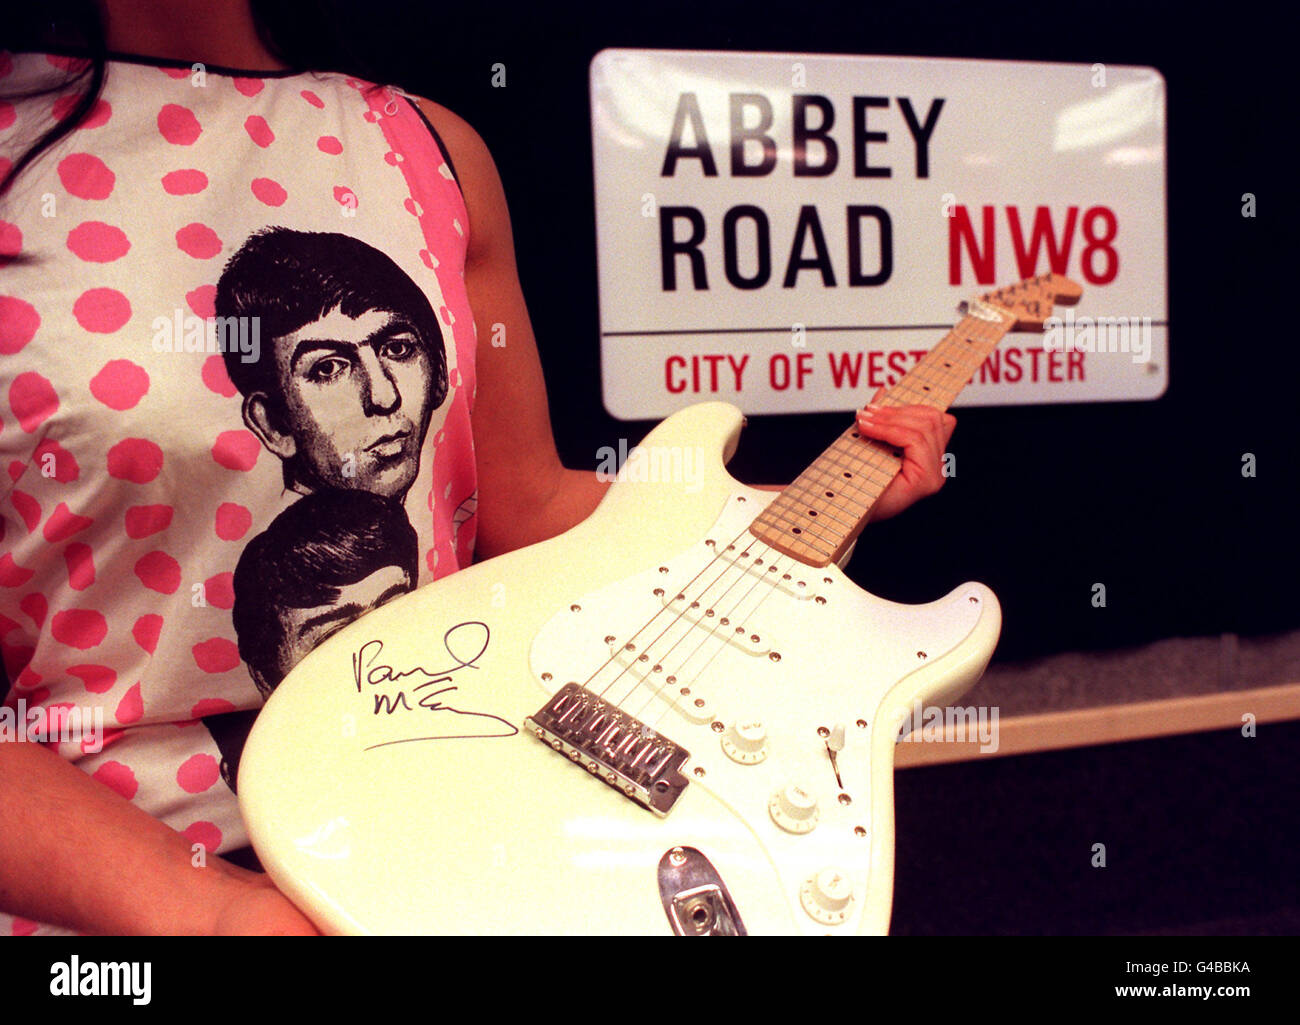 An original 1960's sleeveless 'Beatles' dress printed with facial portraits of the four members of the band, a Fender Squier Stratocaster electric guitar signed by Paul McCartney and an unused enamel street sign for the road their recording studio made famous - Abbey Road in north London - on show at Christie's Auction House in London today (Tuesday) ahead of their sale on April 30th. Photo by Ben Curtis/PA Stock Photo